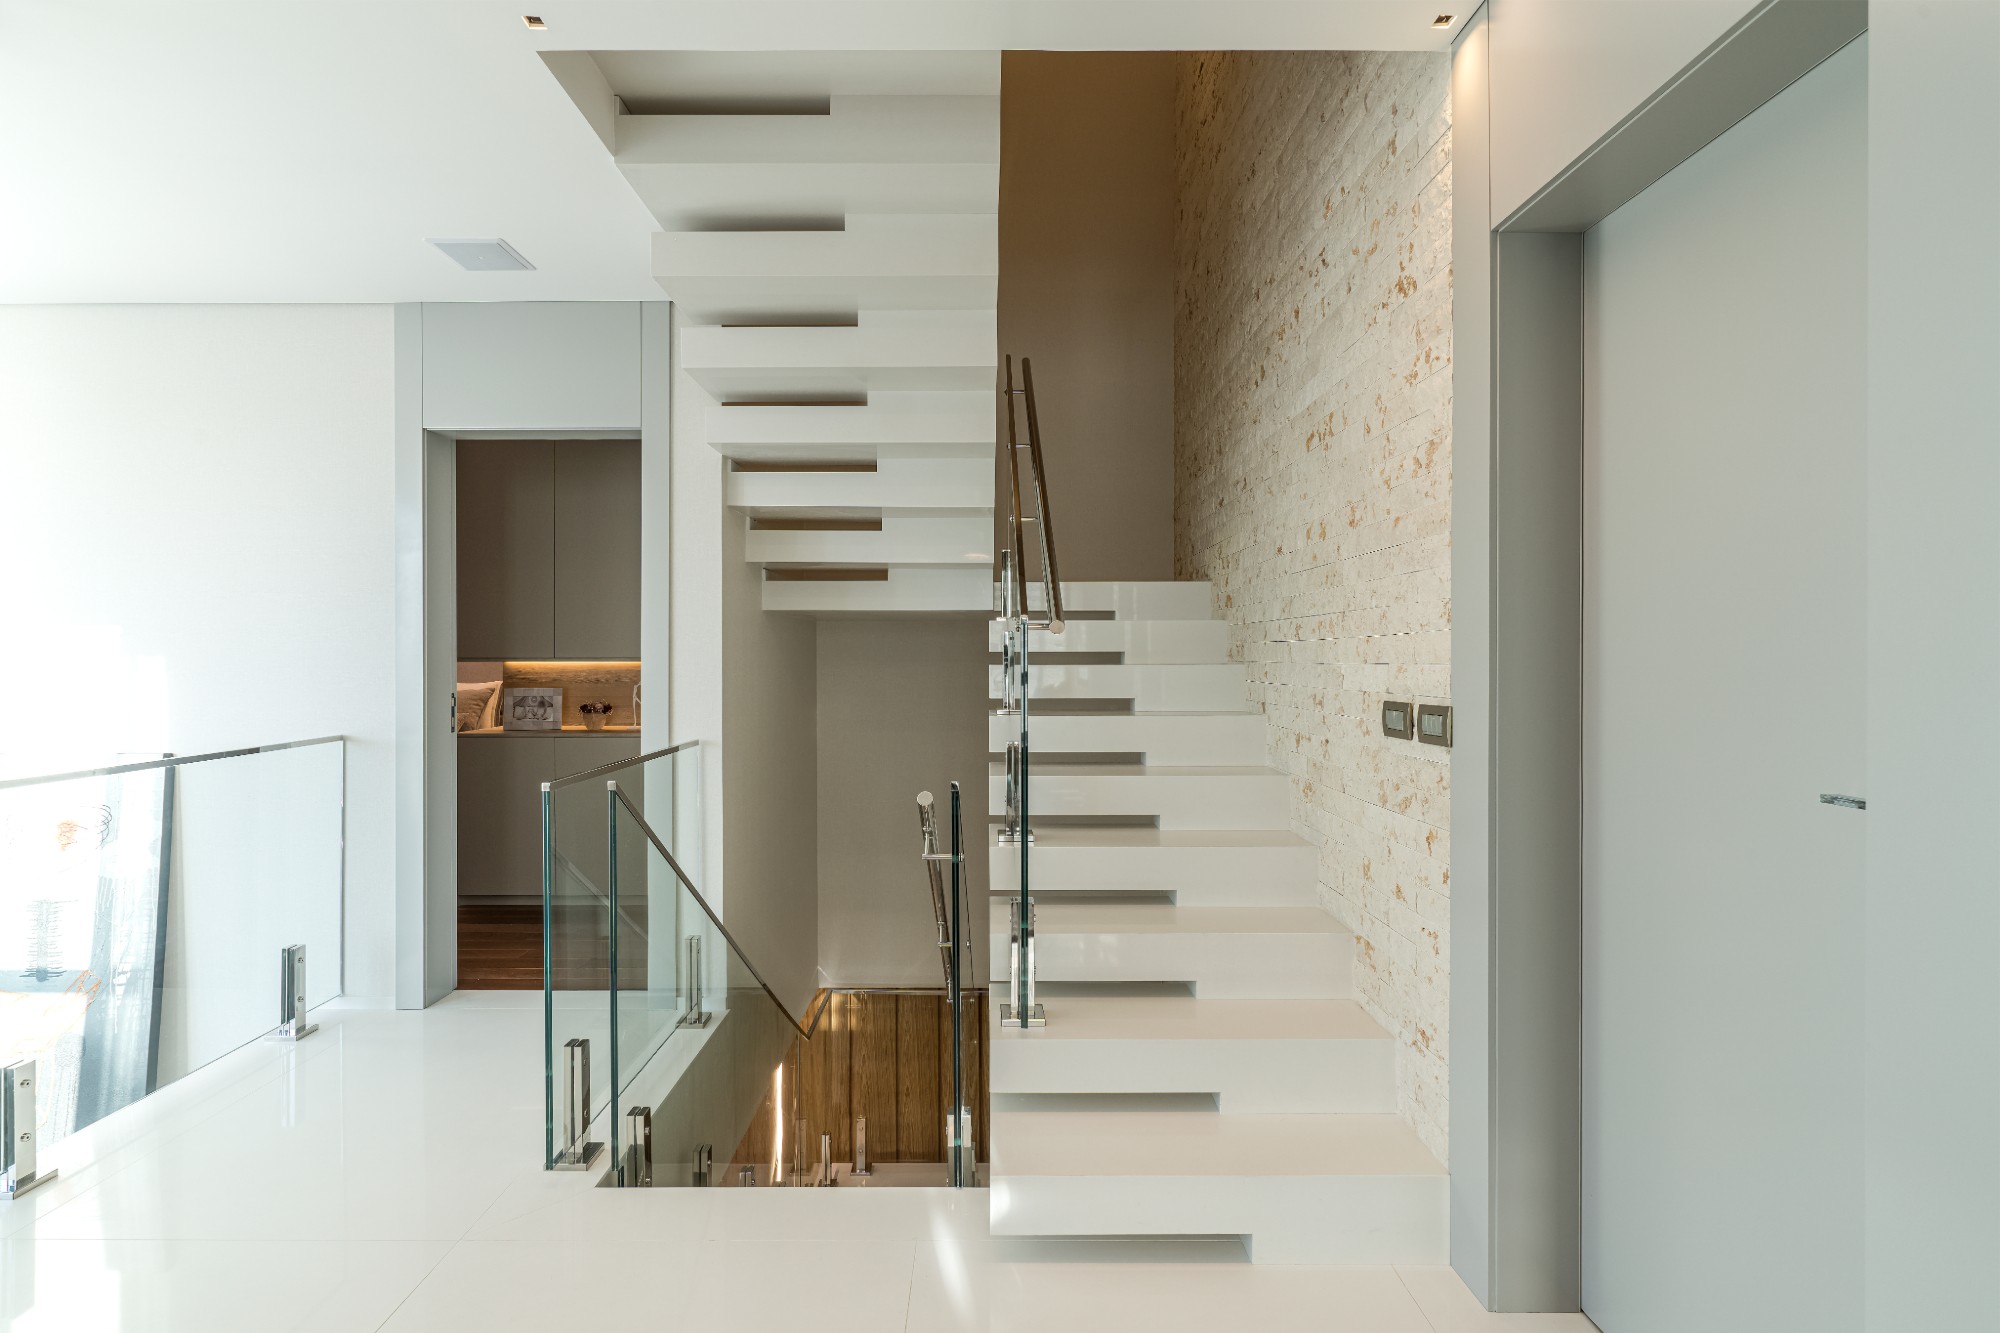 Image 45 of 8 in The conversion of three flats into a single luxury home is taken to the next level thanks to Cosentino - Cosentino